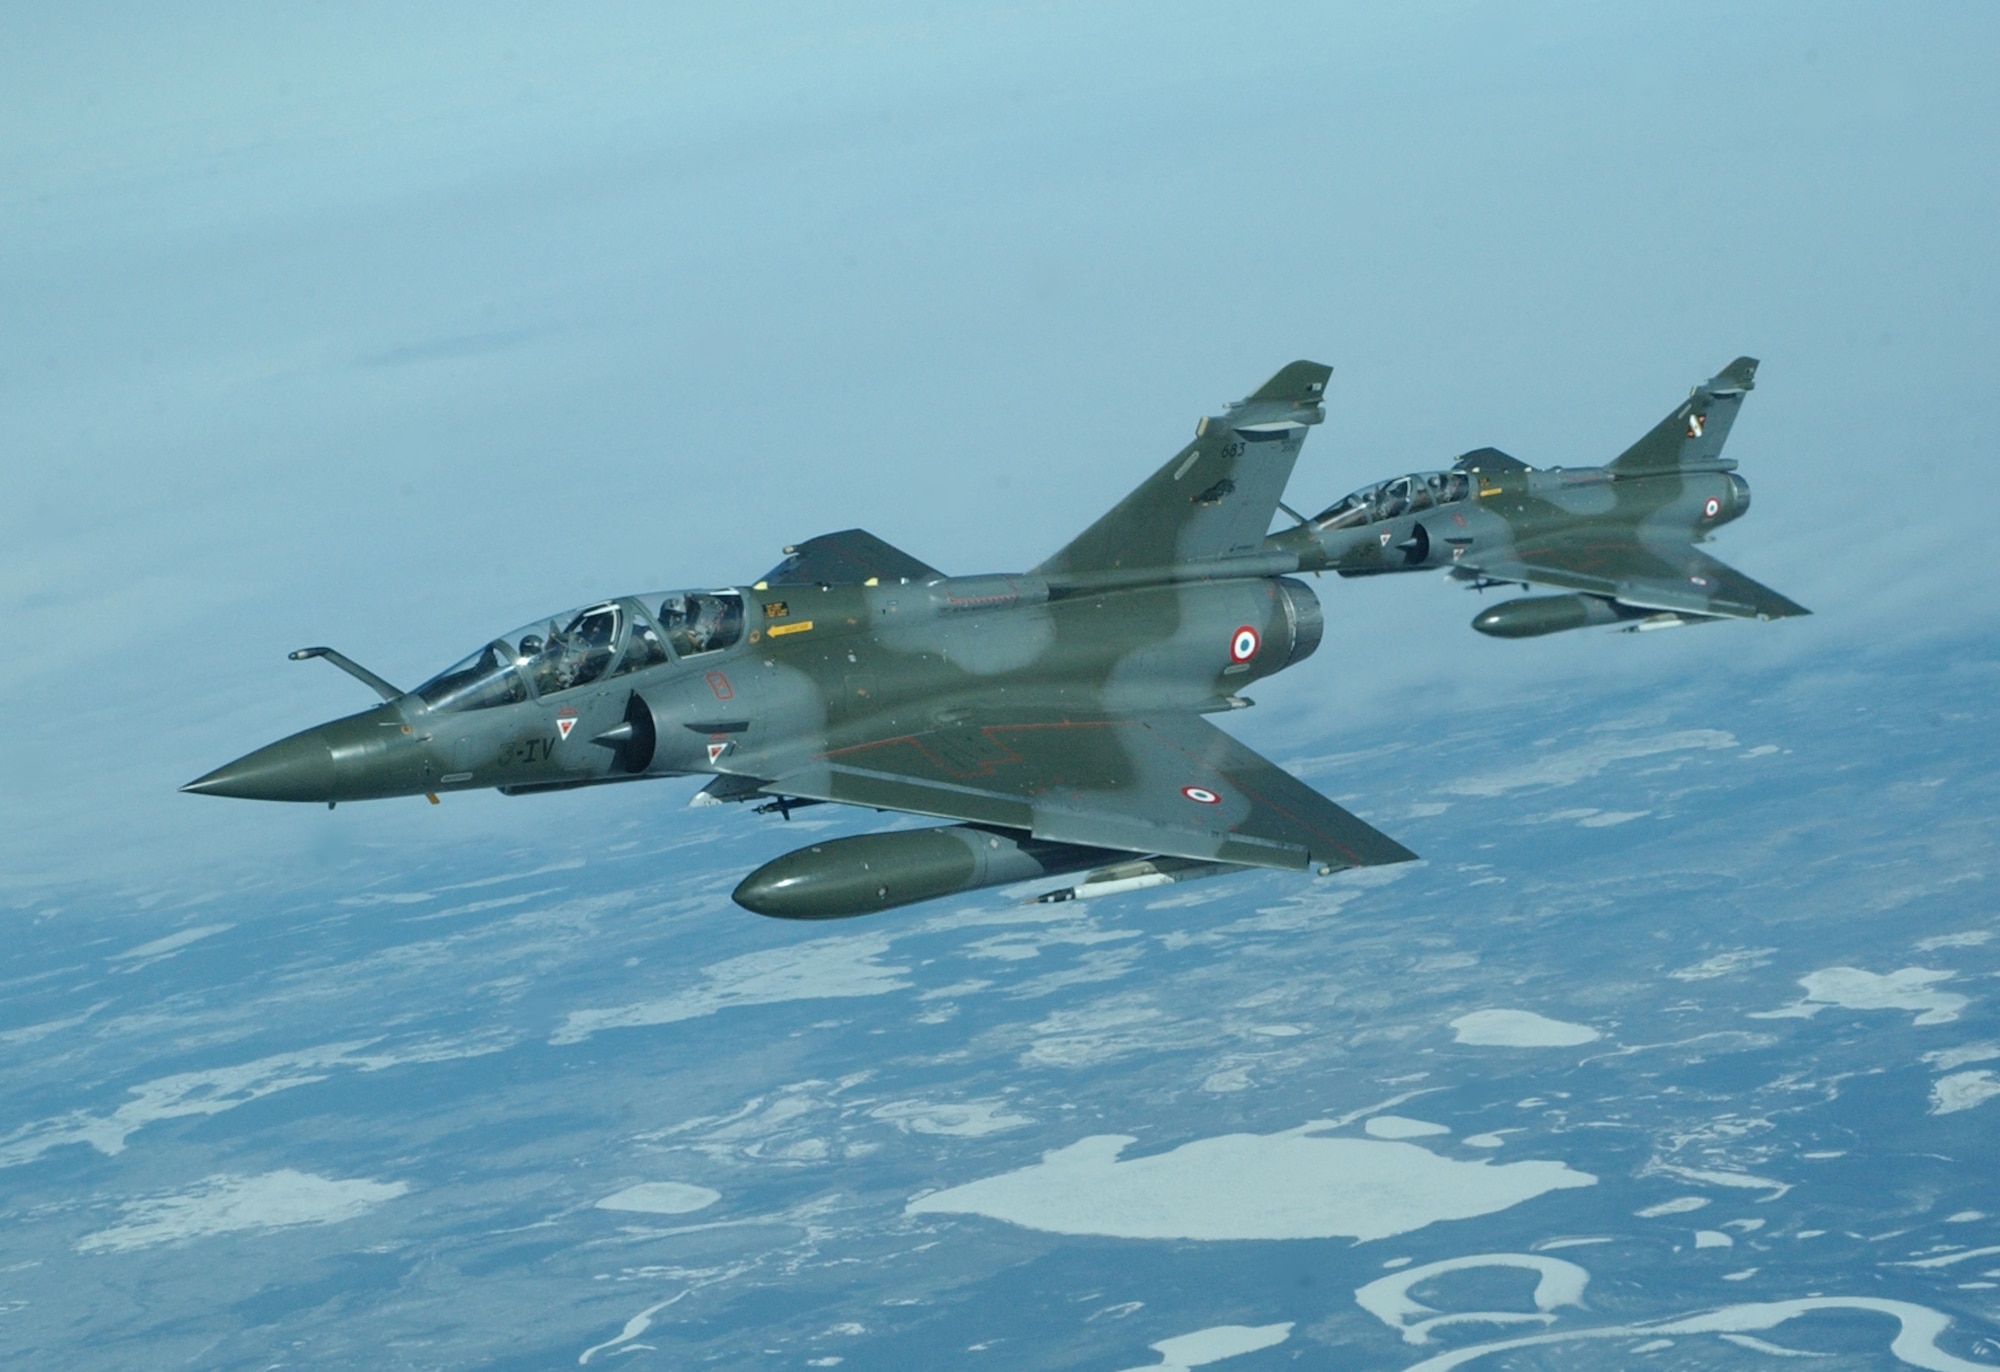 EIELSON AIR FORCE BASE, Alaska--Two French air force Mirage 2000 fighter jets fly alongside a KC-10 Extender during Red Flag-Alaska 07-1 April 11. Fighter jets typically require aerial refueling to fight and stay in the fight longer. (U.S. Air Force photo by Senior Airman Justin Weaver).                      